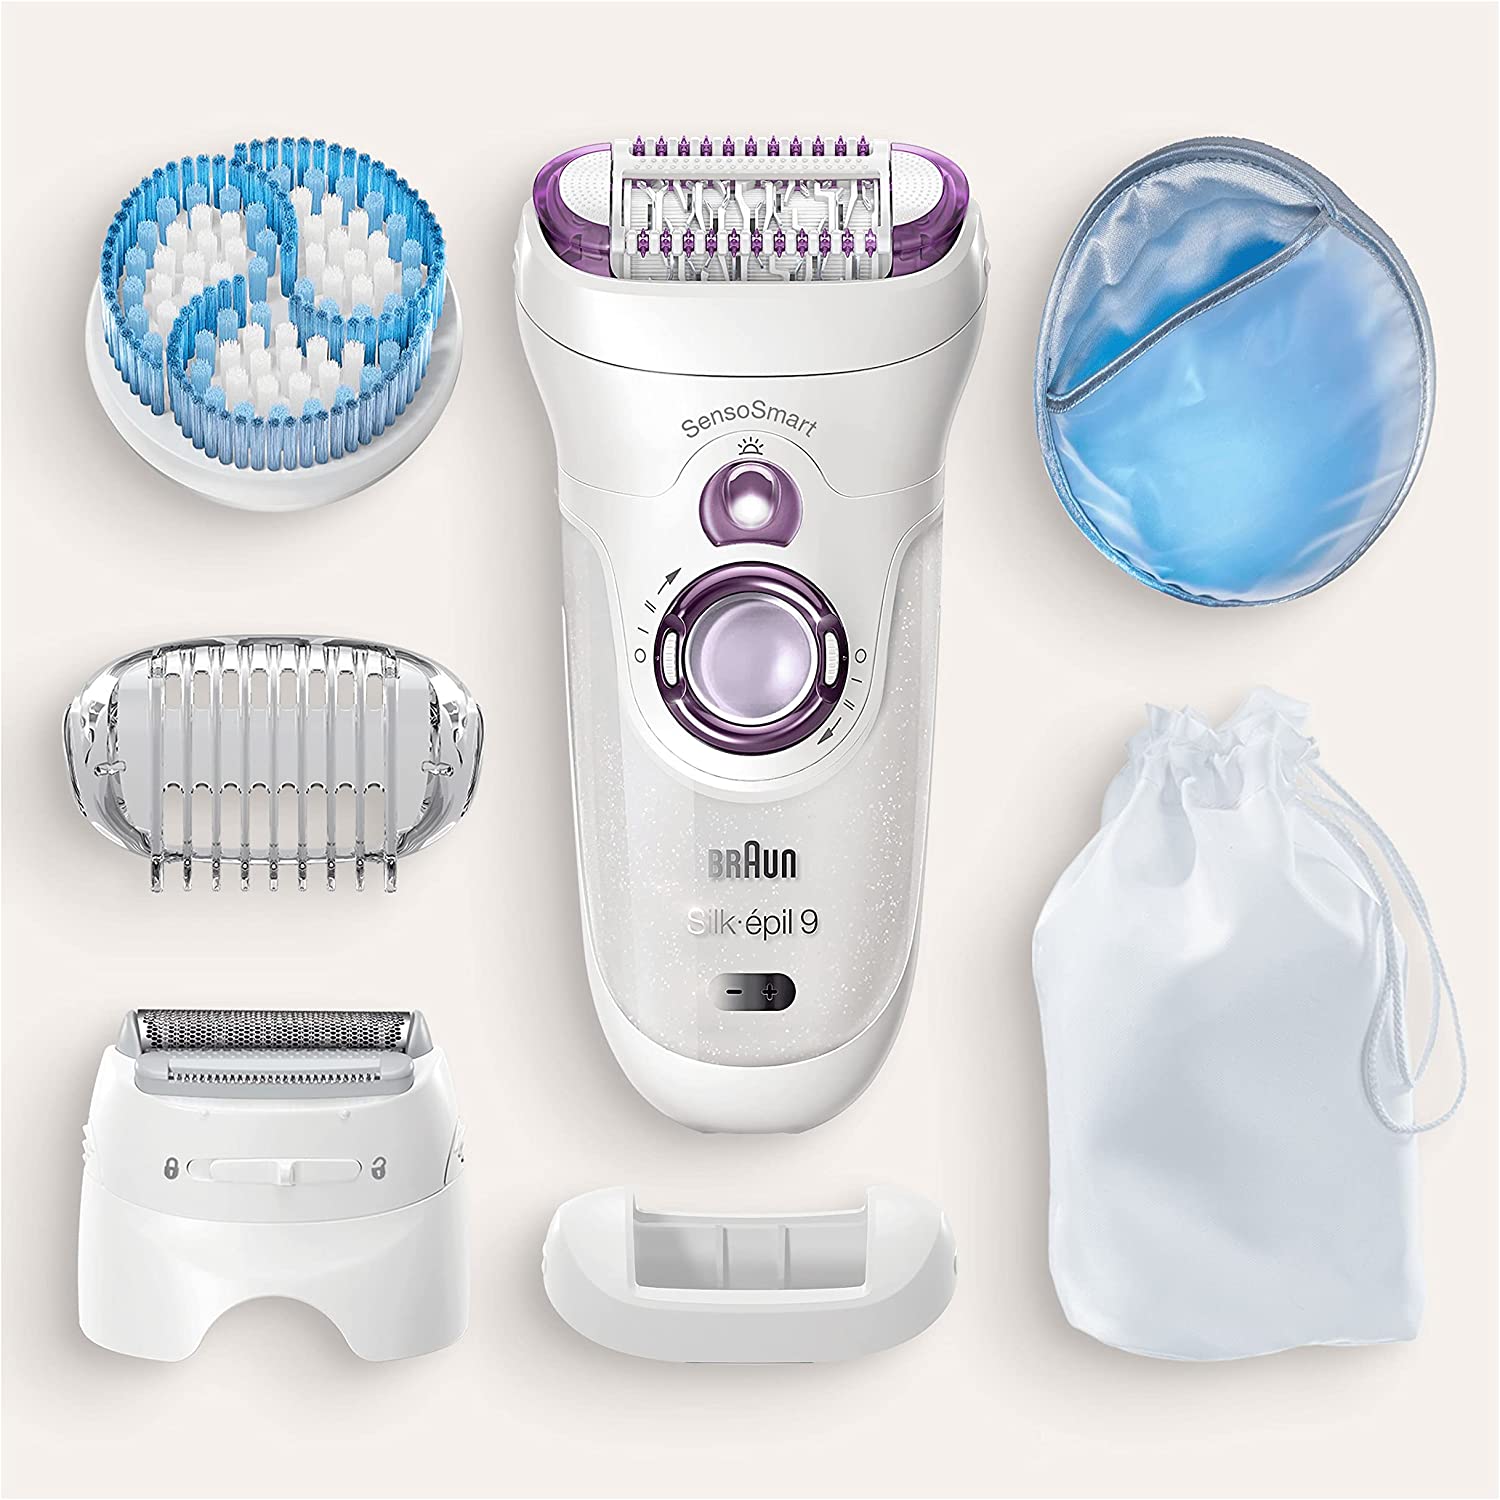 Braun Silk-épil 9, Epilator for Long Lasting Hair Removal, 4 Extras, Pouch, Cooling Glove, 9-735 - Healthxpress.ie